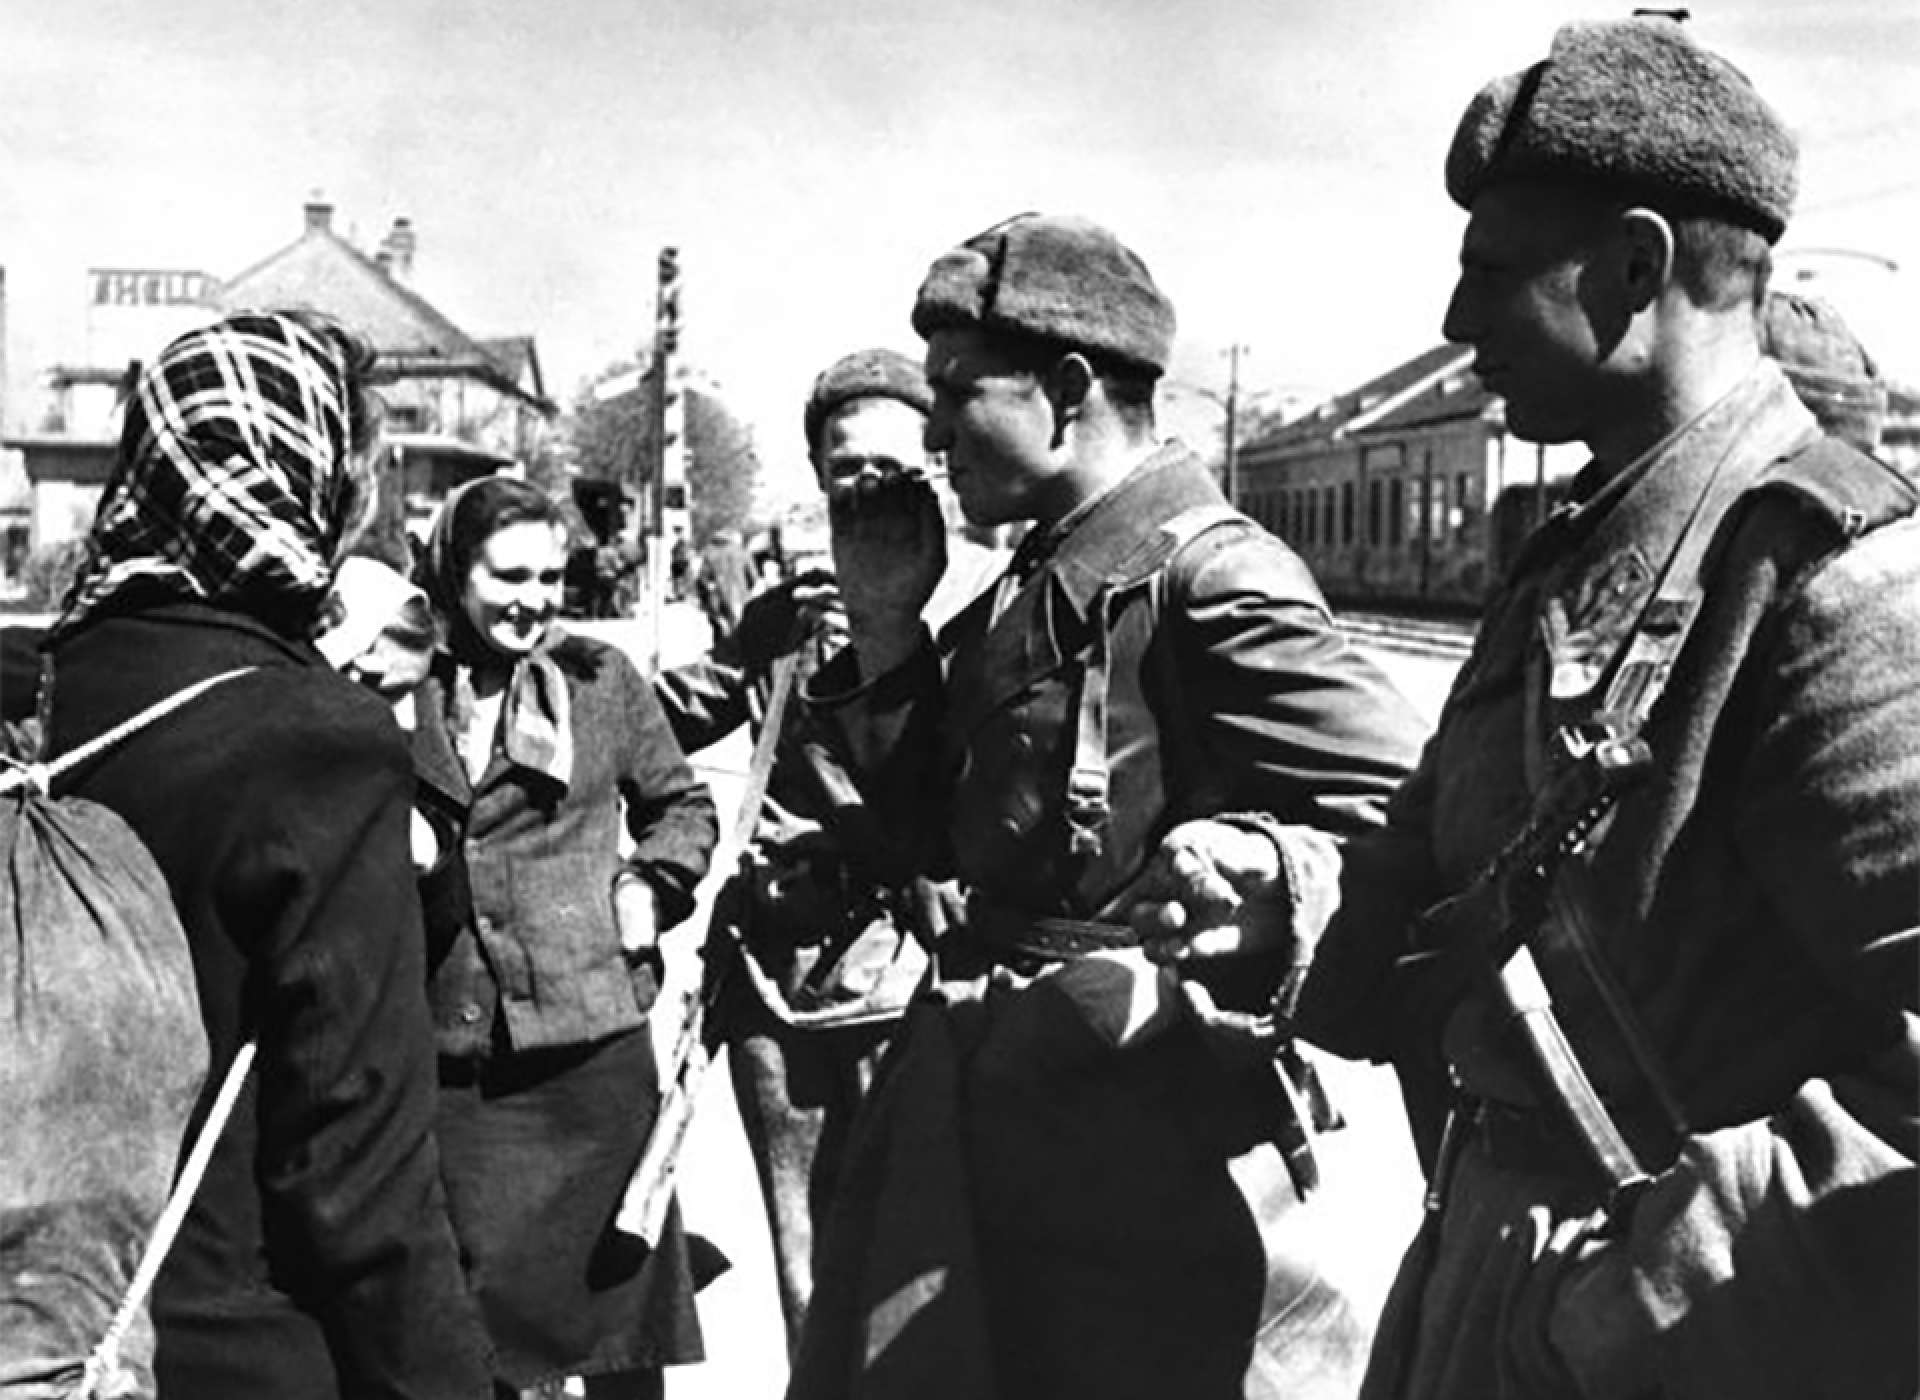 Soviet soldiers talking to liberated slave laborers from the Soviet Union in Vienna. Image courtesy of the Voennyi album and Tass.